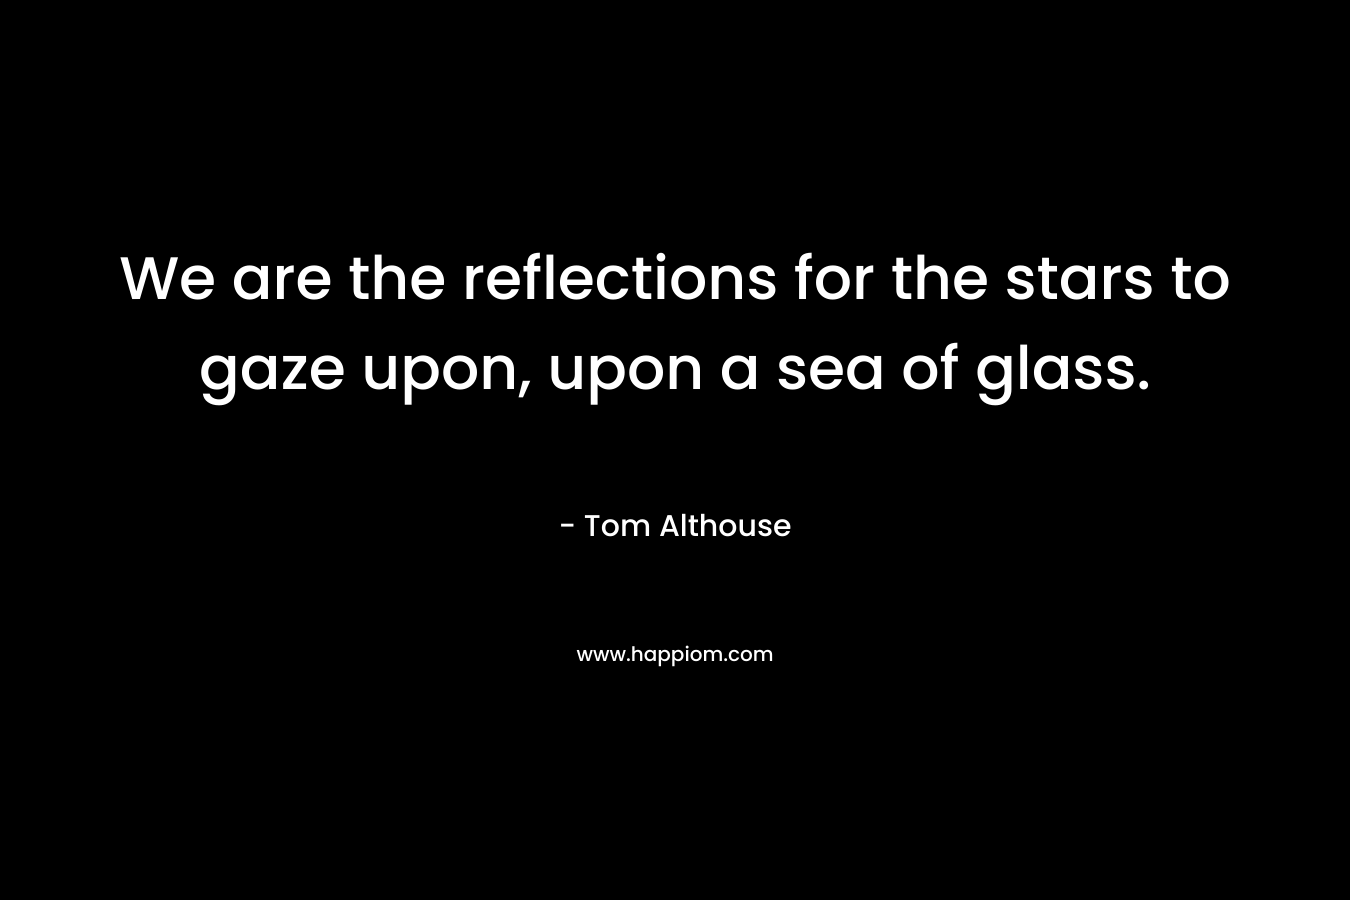 We are the reflections for the stars to gaze upon, upon a sea of glass.